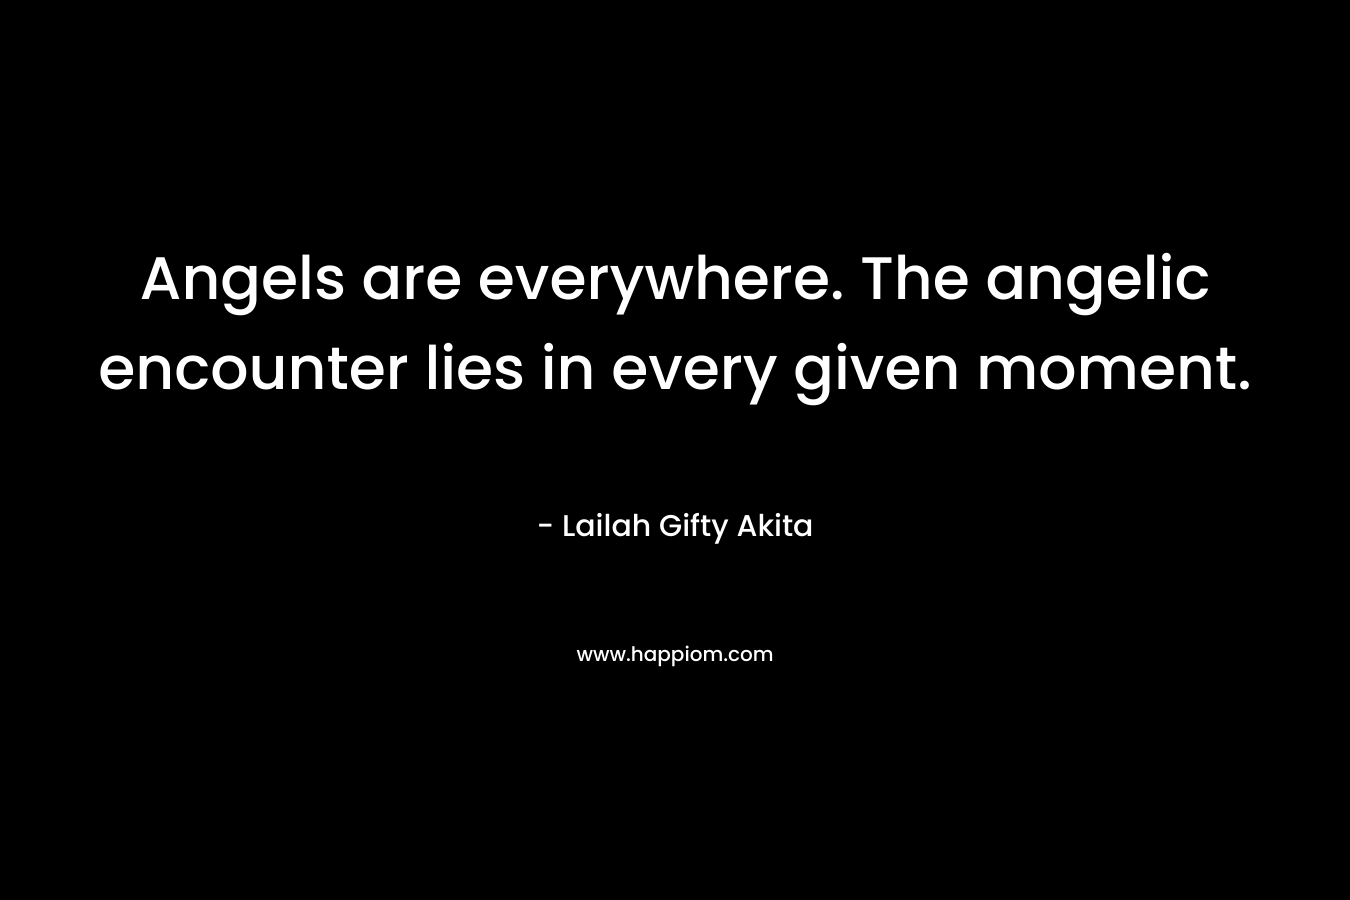 Angels are everywhere. The angelic encounter lies in every given moment.